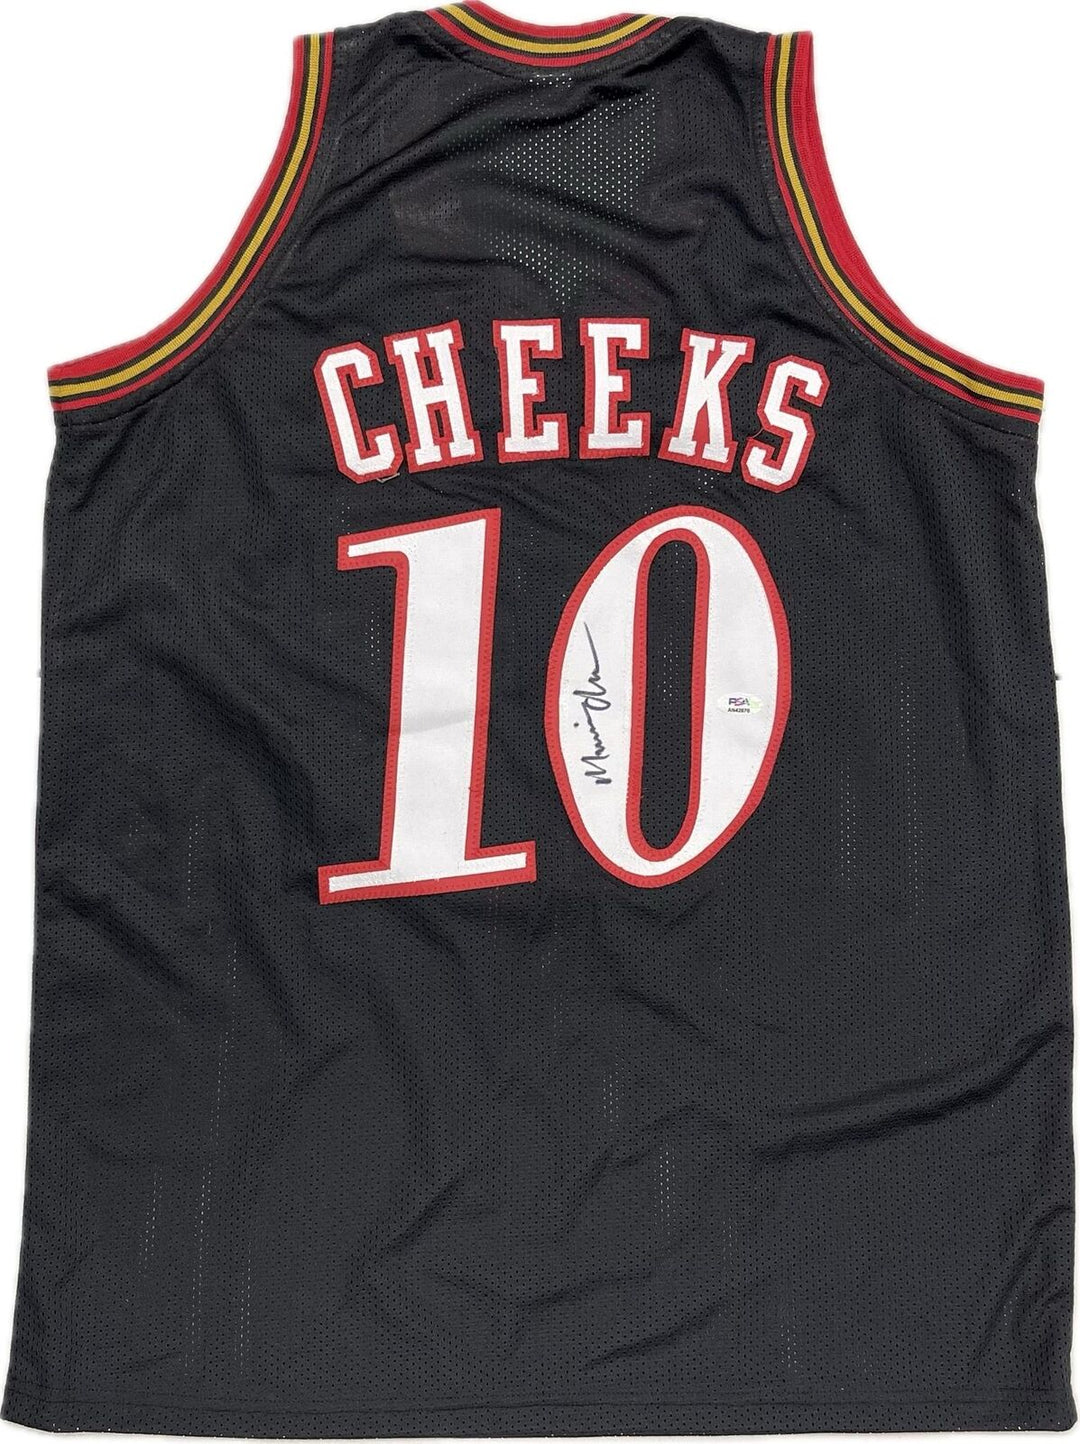 Maurice Mo Cheeks signed jersey PSA/DNA 76ers Autographed Sixers Image 1